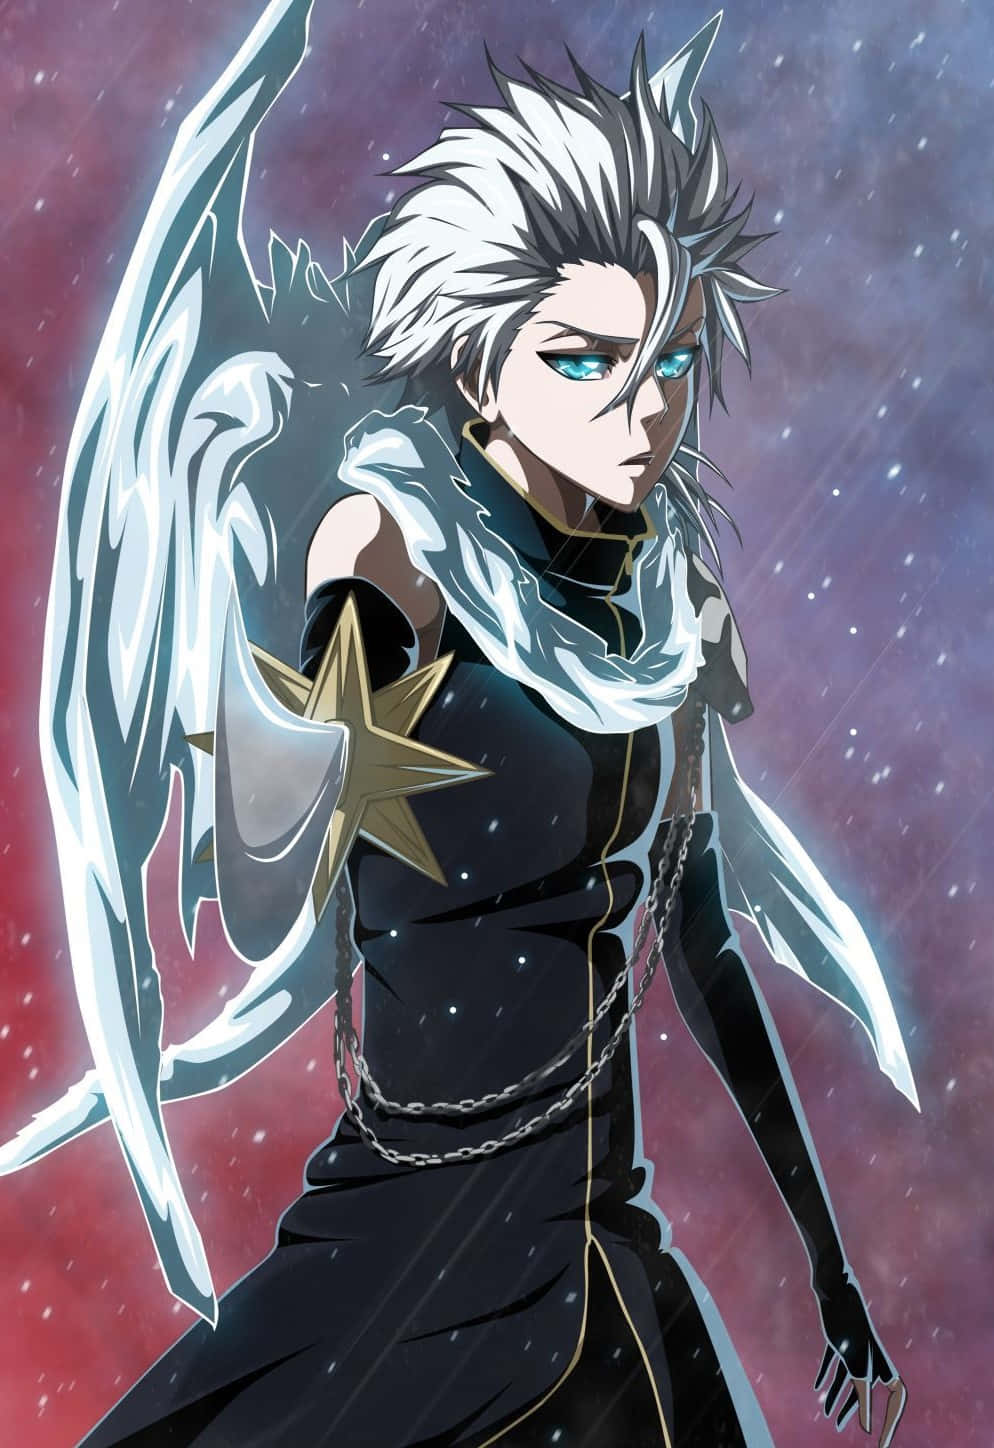 Toshiro Hitsugaya, captain of the 10th division of the Gotei 13 Wallpaper